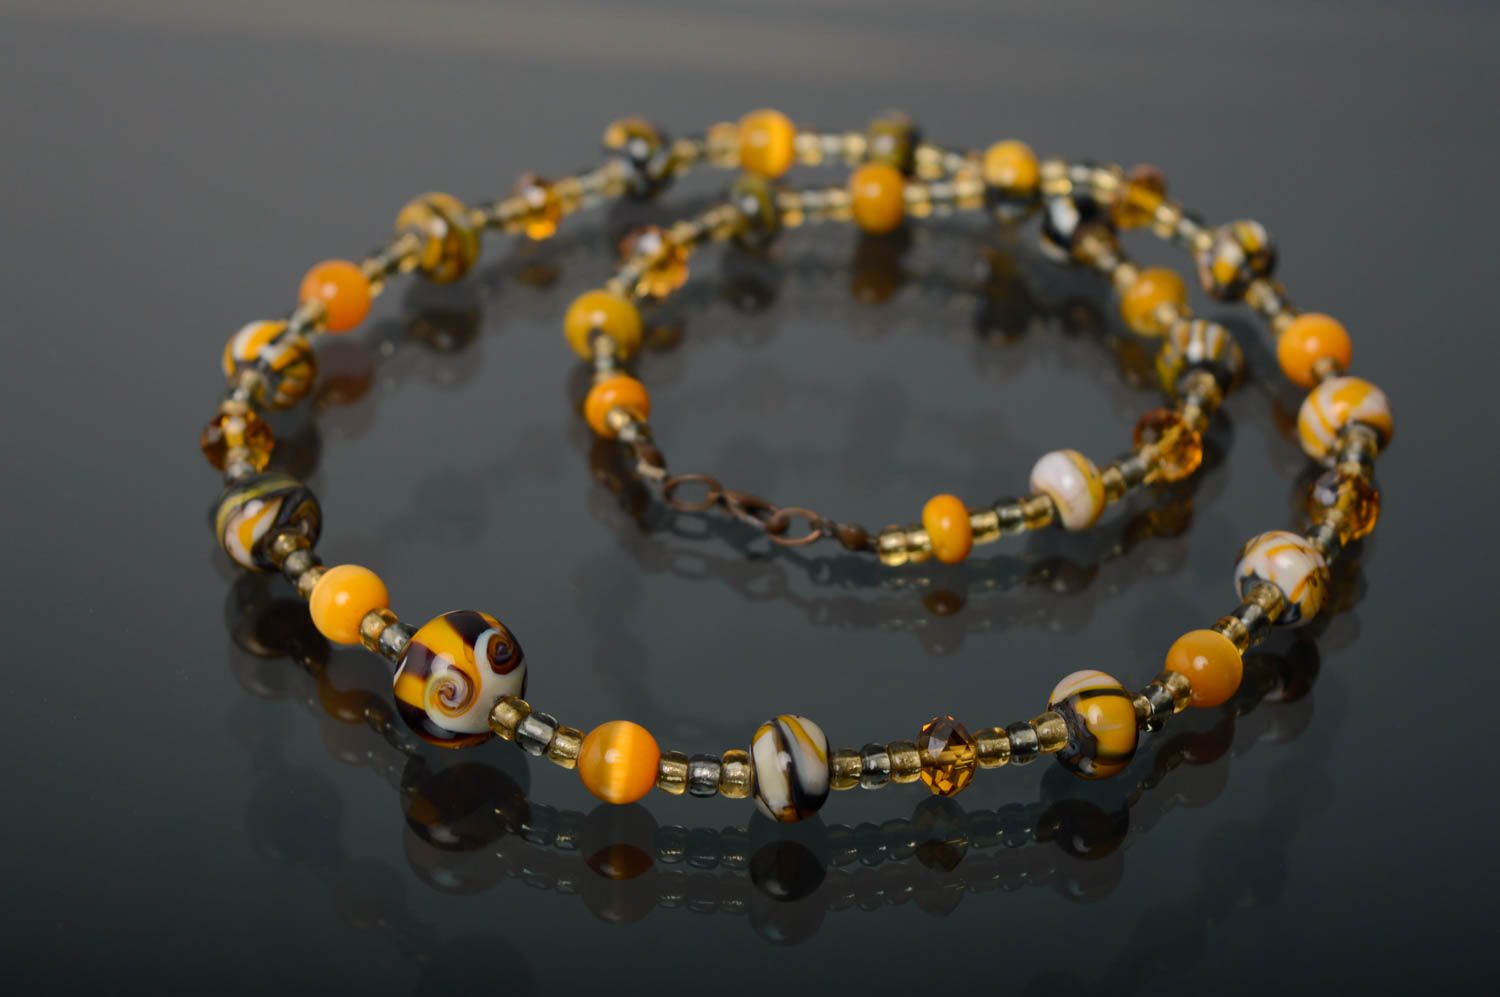 Lampwork glass bead necklace photo 1